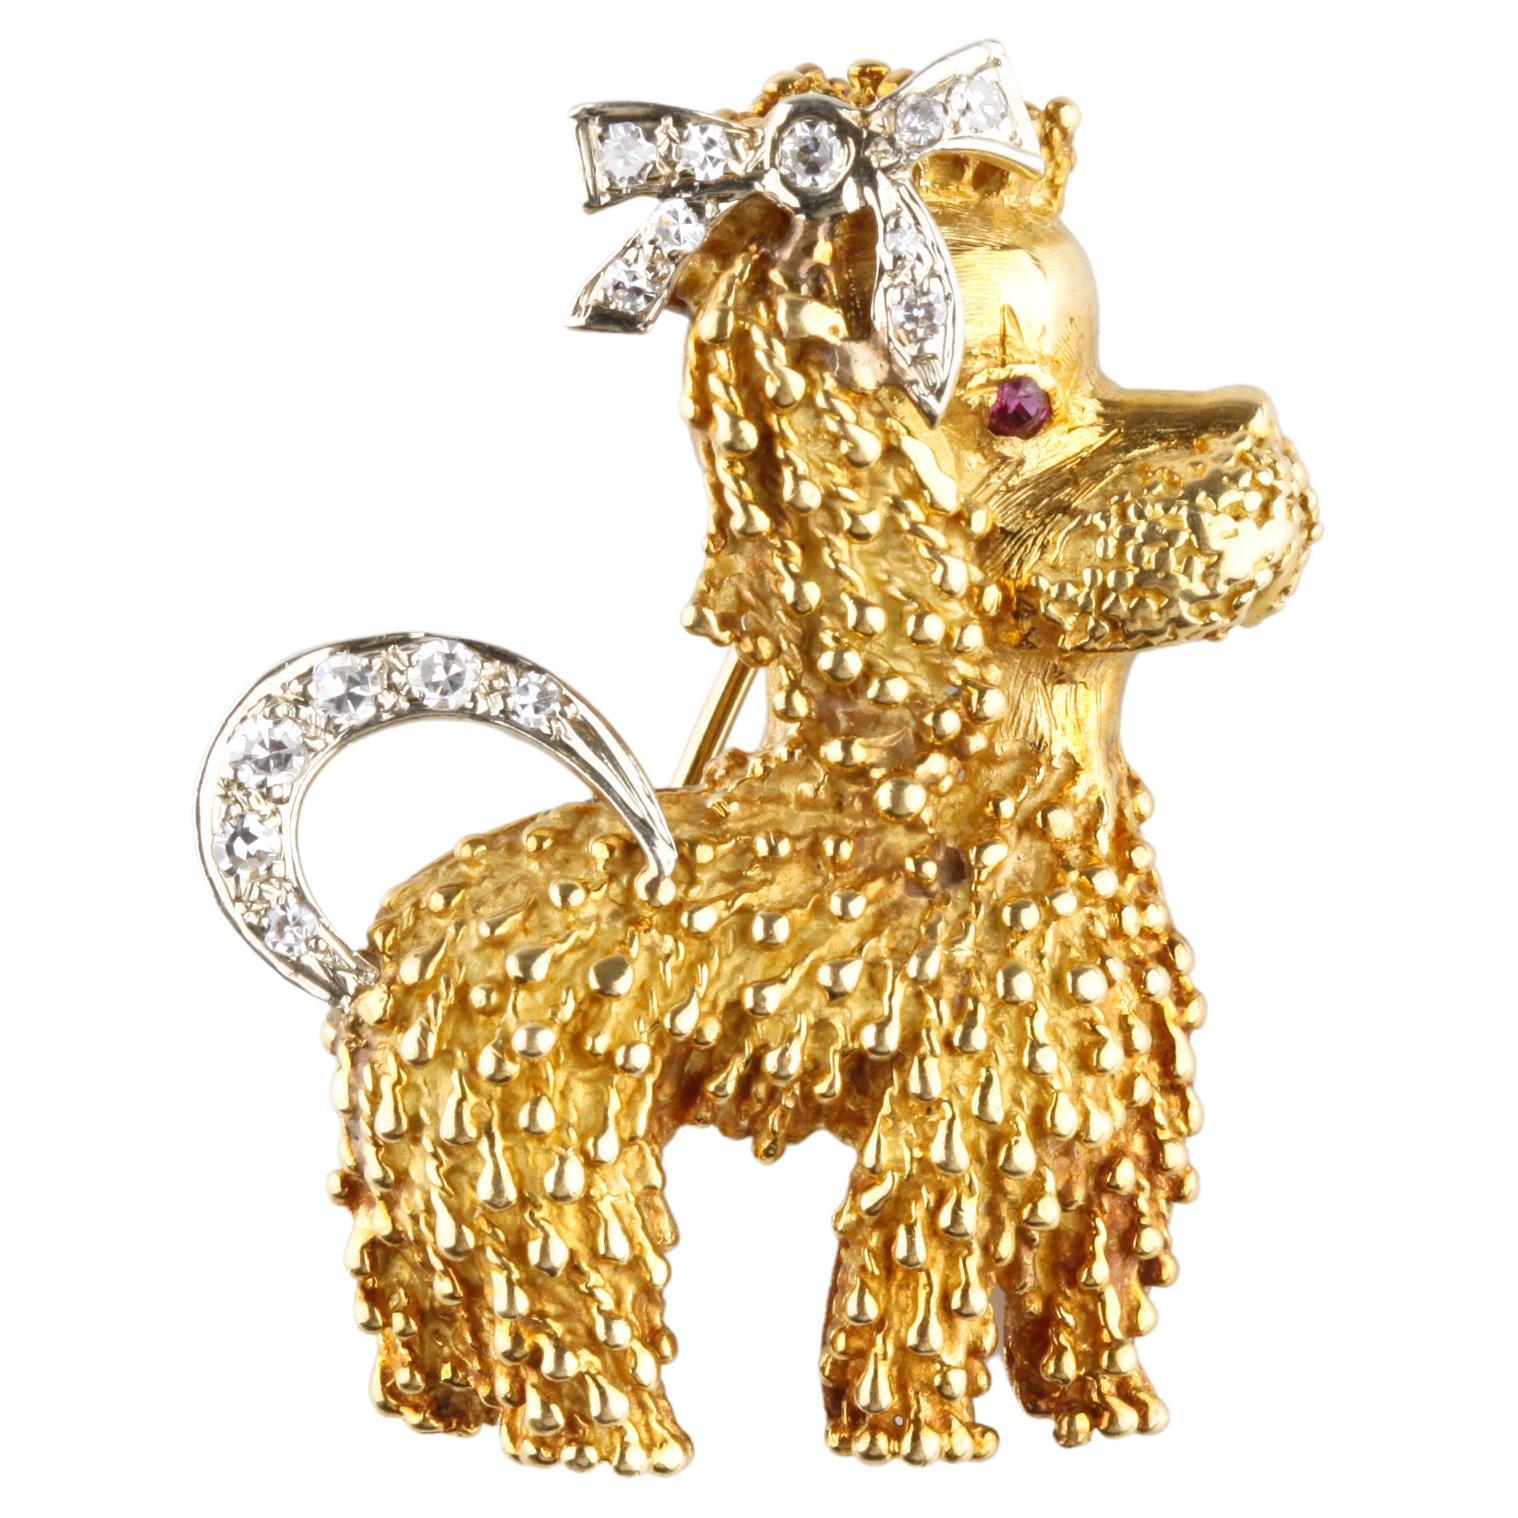 18k Yellow Gold Poodle Brooch Featuring Diamond & Ruby Accents with Certificate For Sale